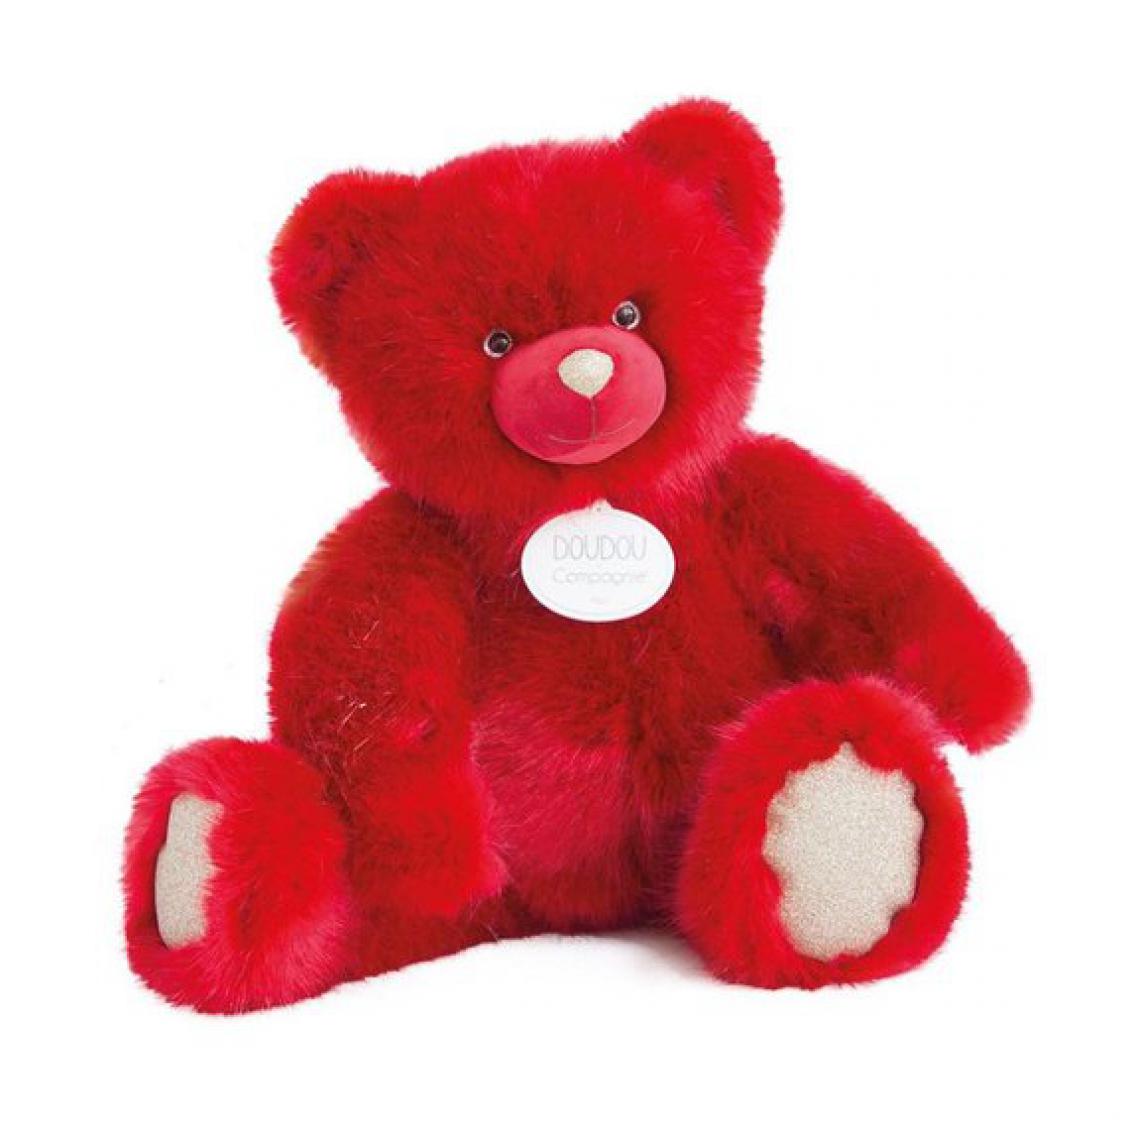 Ludendo - Ours collection rubis 60 cm - Animaux